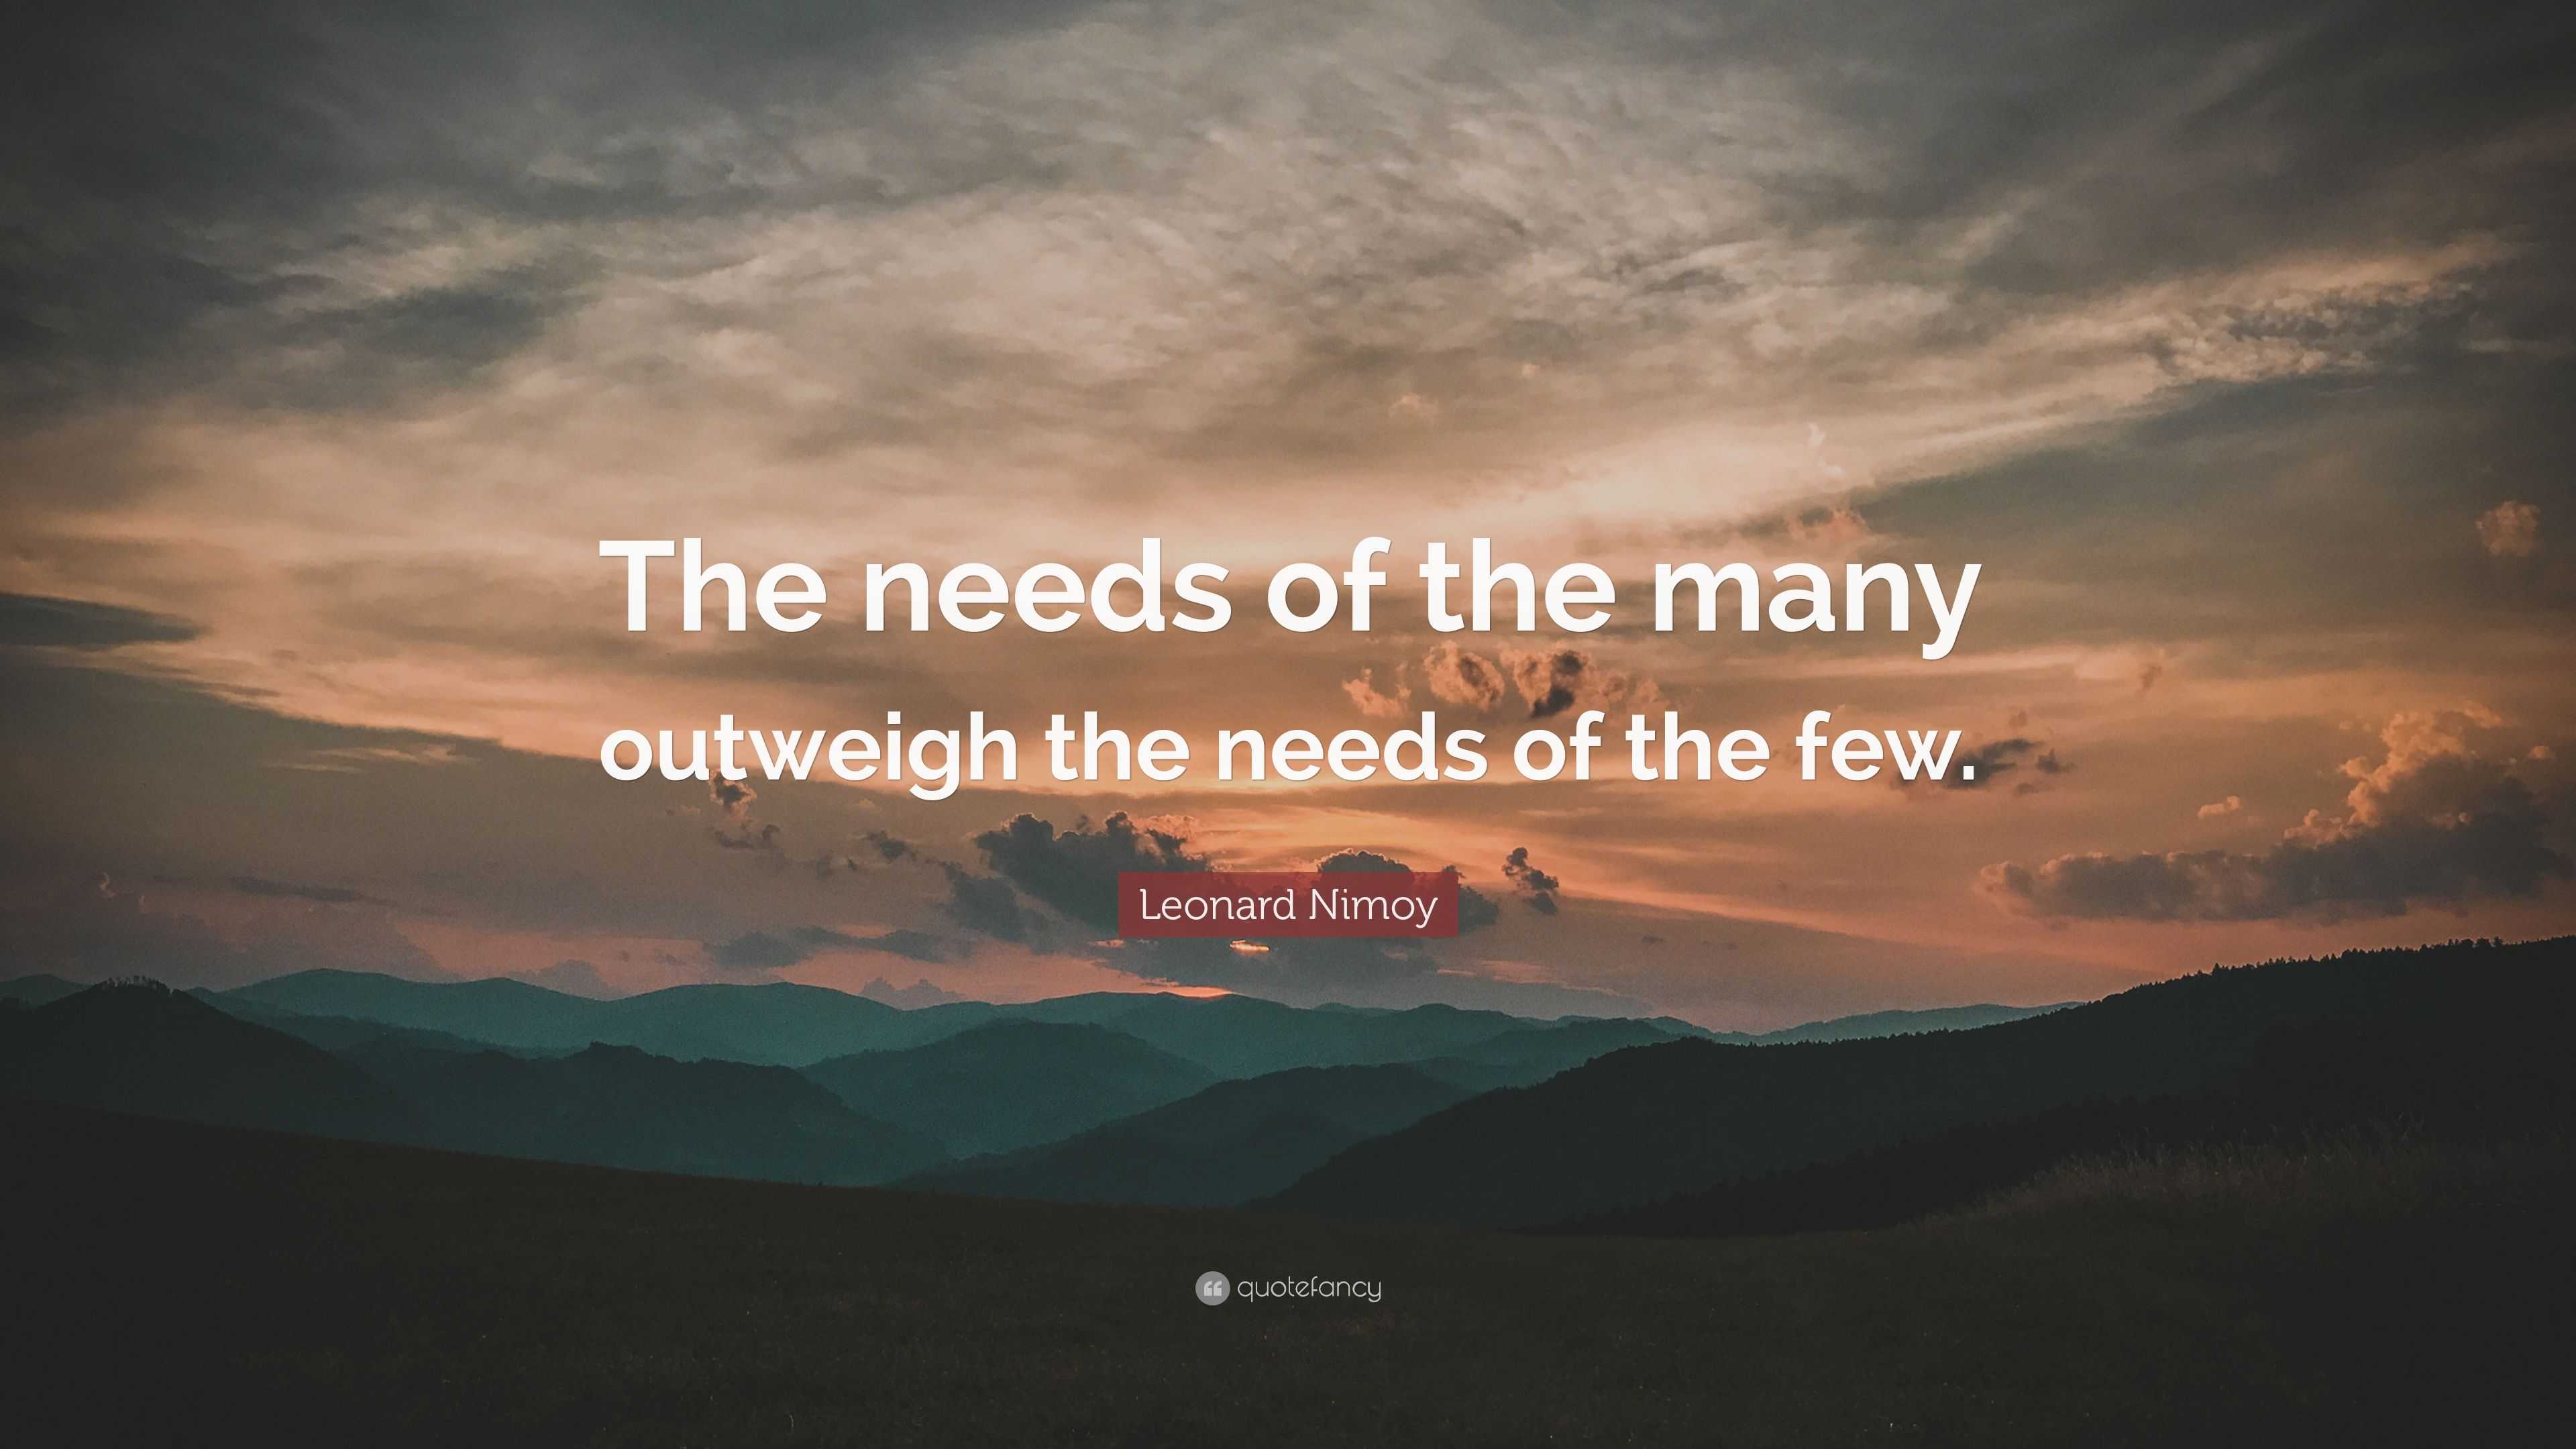 the needs of the many outweigh the needs of the few bible